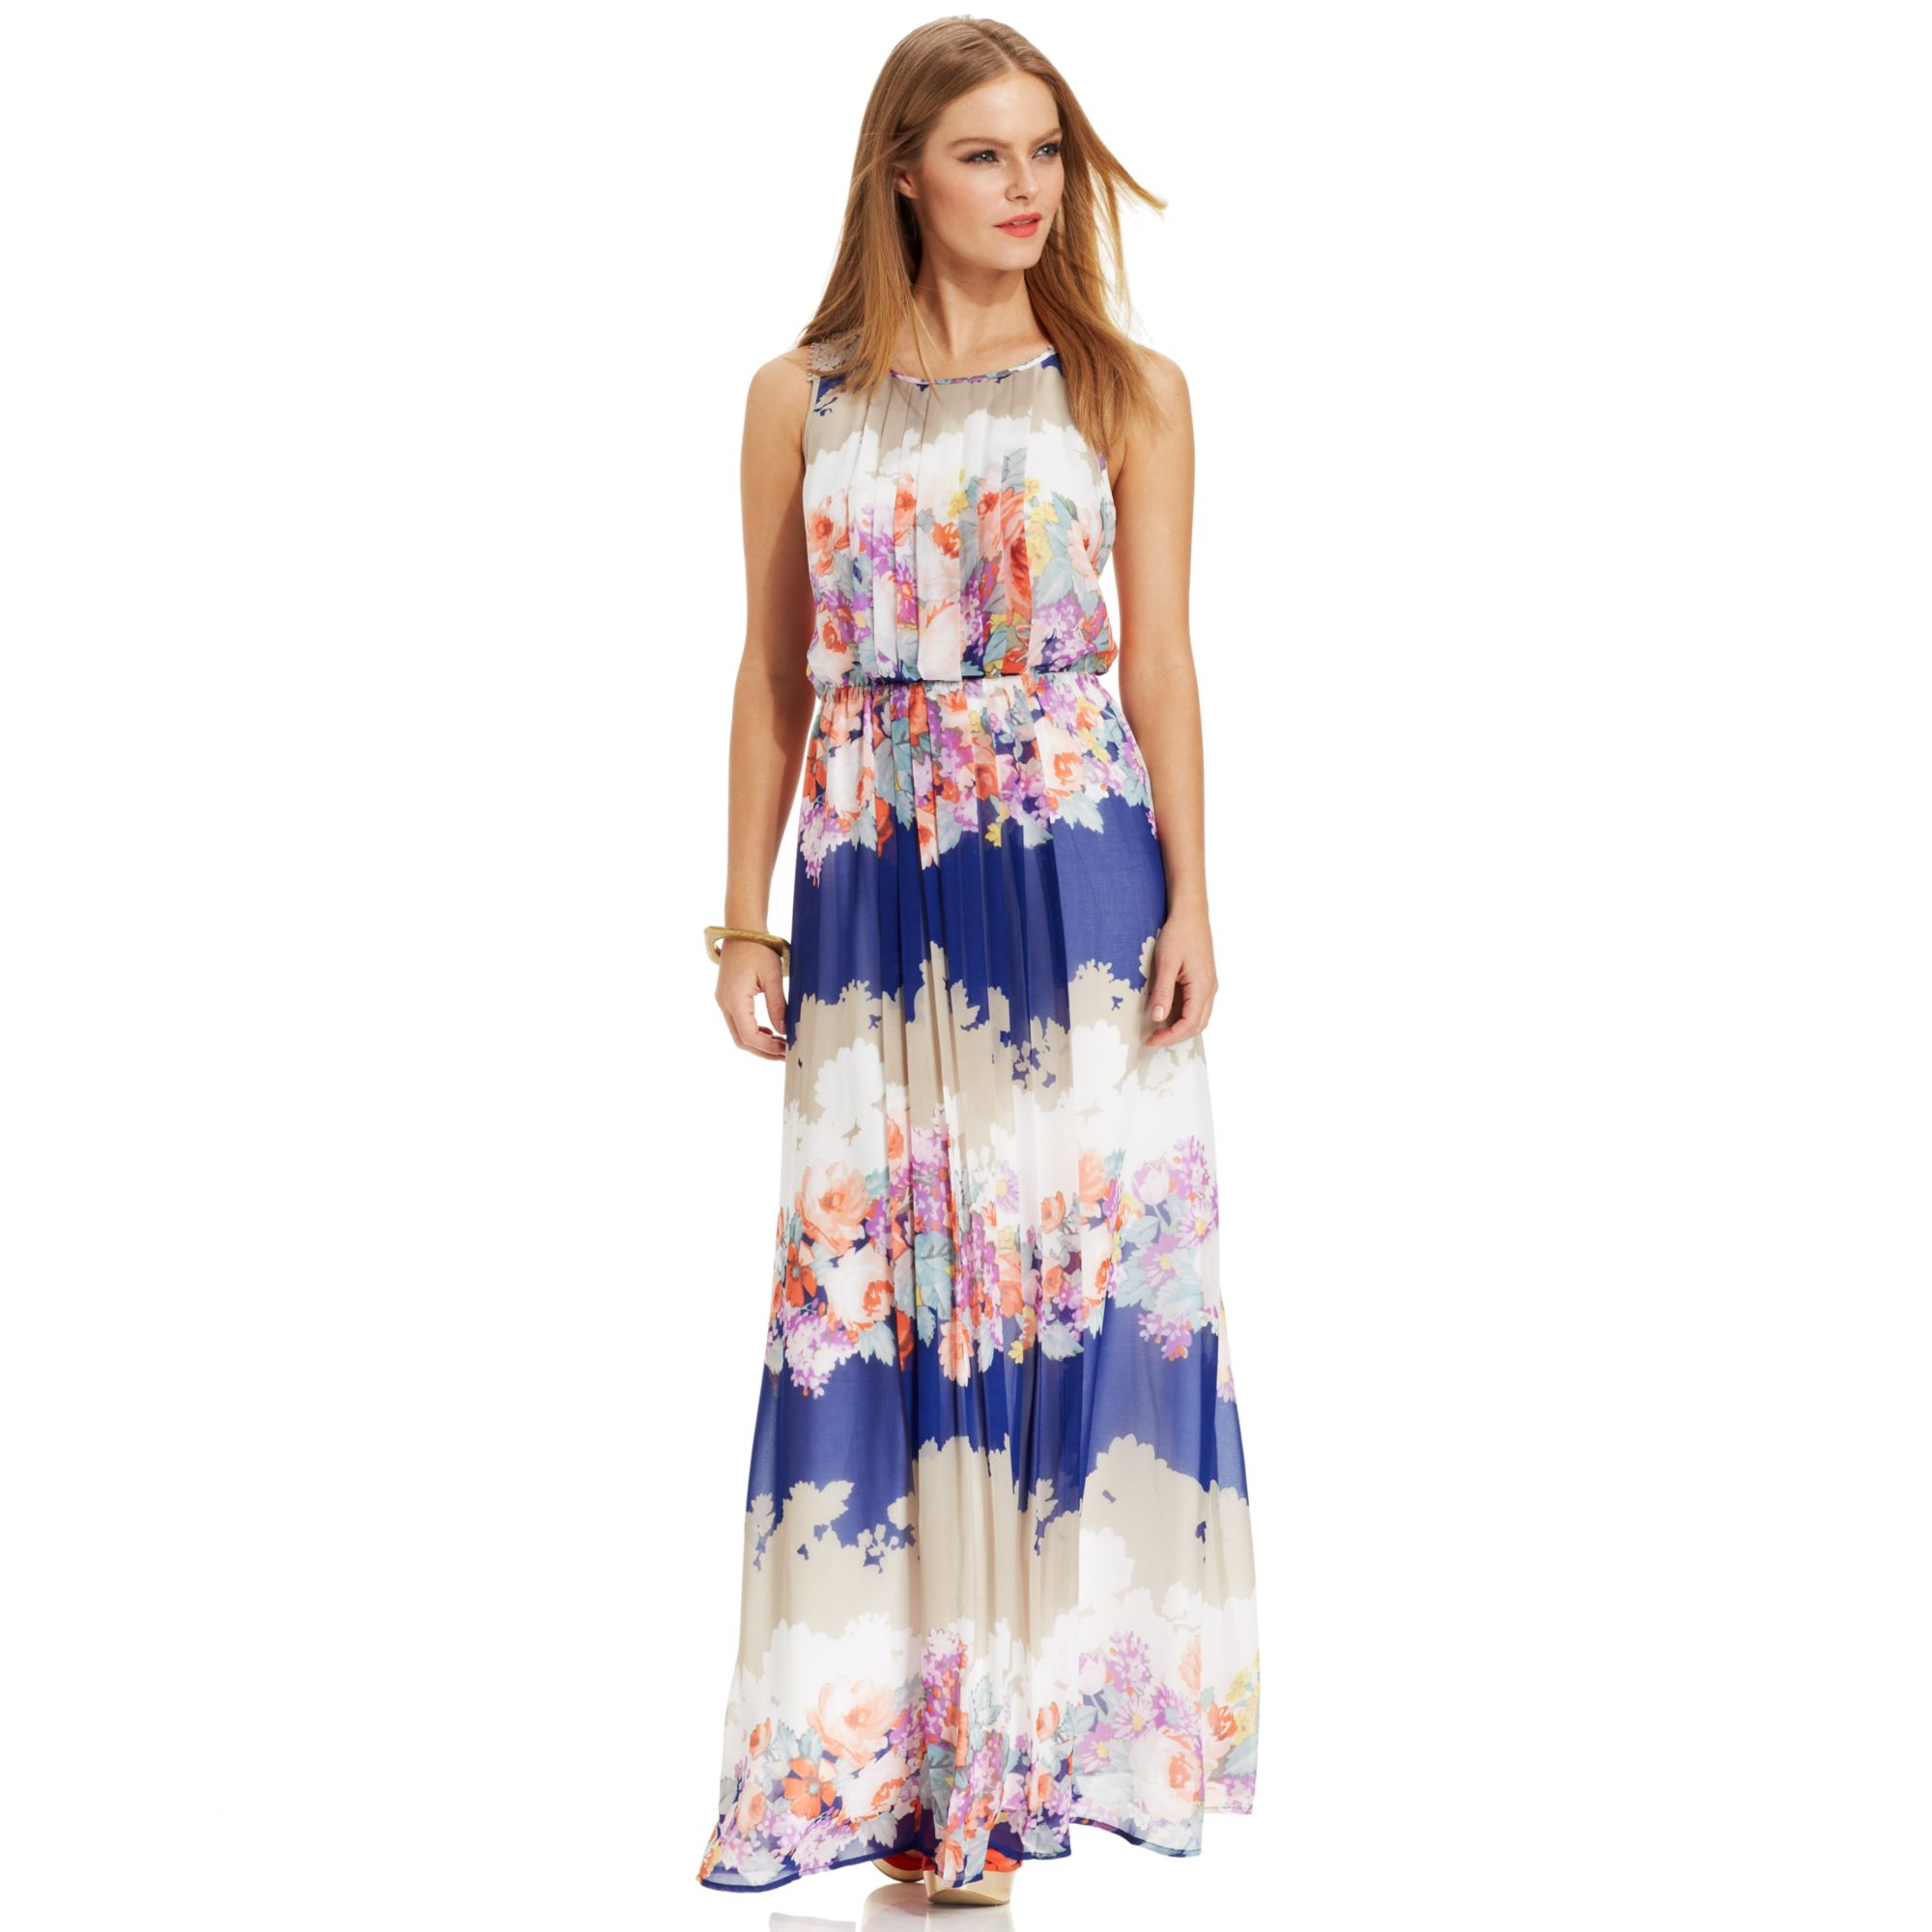 Summer Dresses From Macy's Best Sale ...